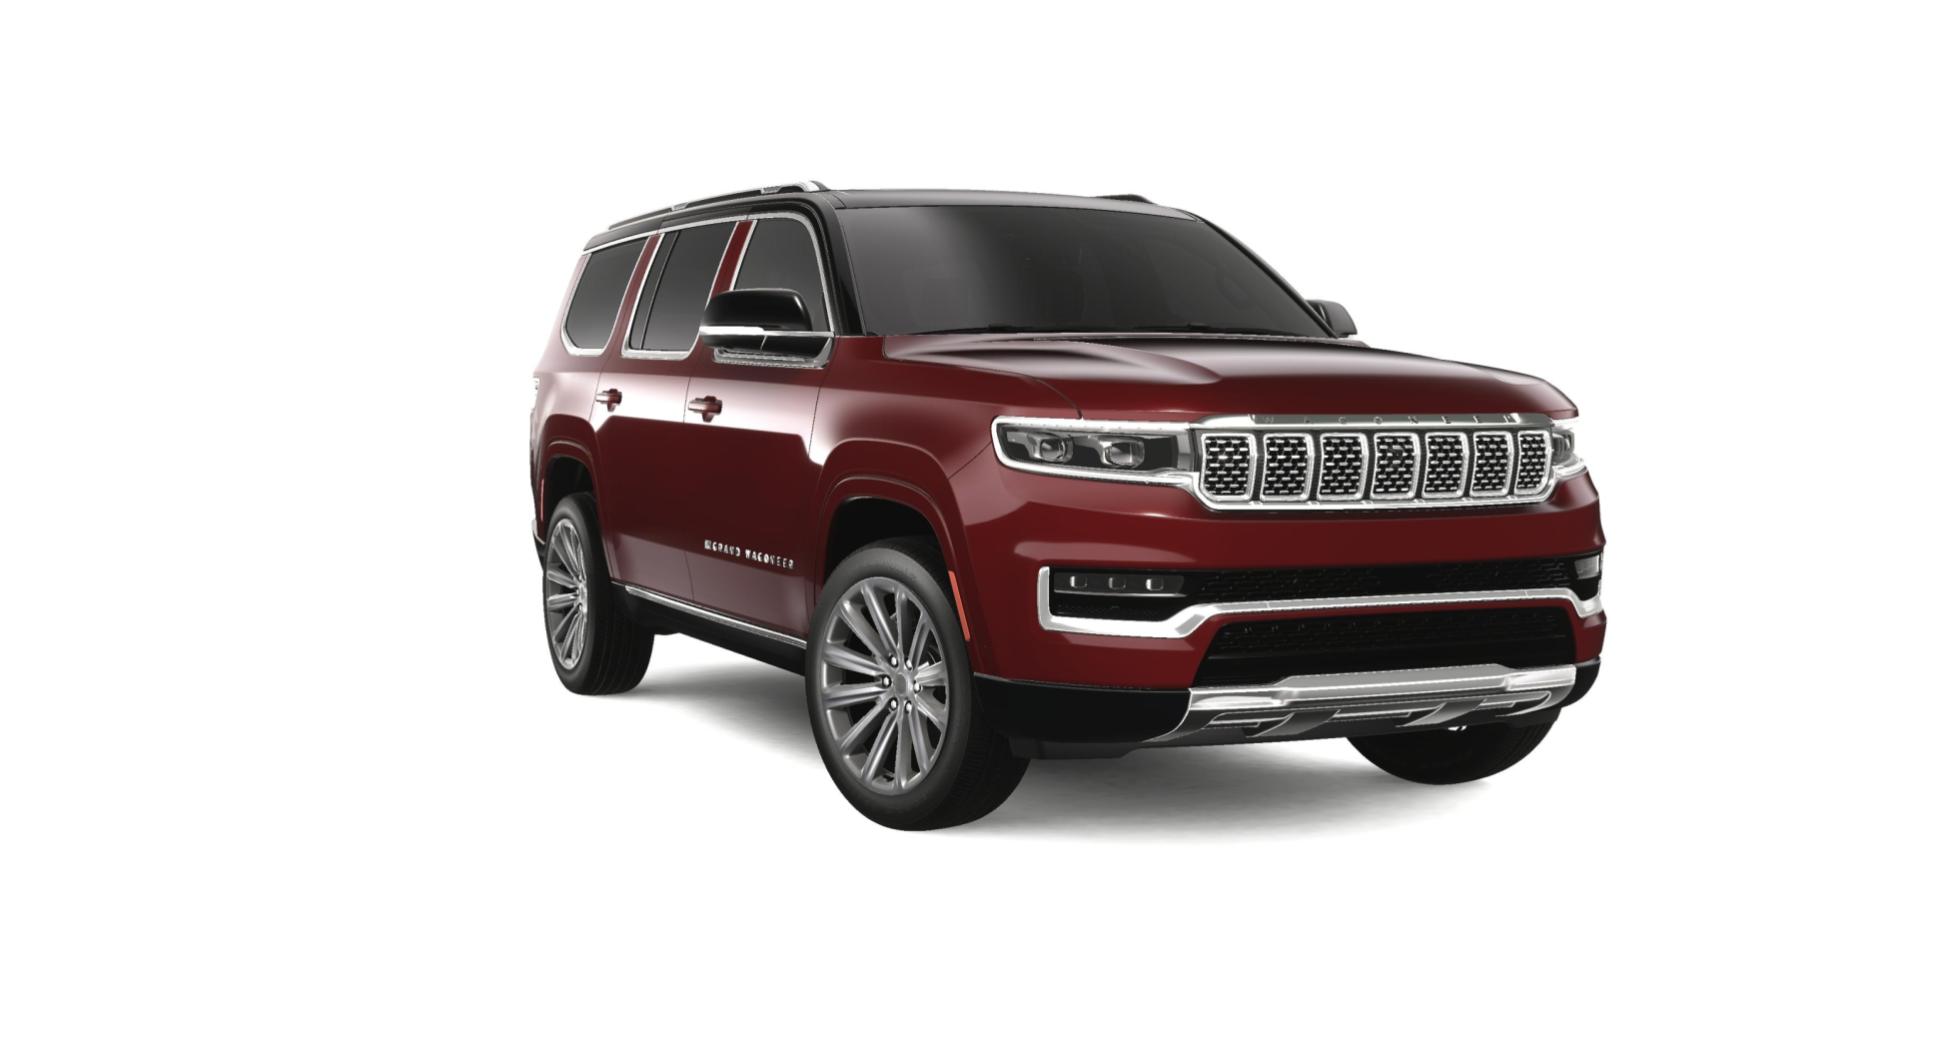 The 2023 jeep grand Wagoneer brings automotive standards to the next level with its new 2023 Jeep Grand Wagoneer Series II, which can’t be compared to the Jeep Wagoneer 2021